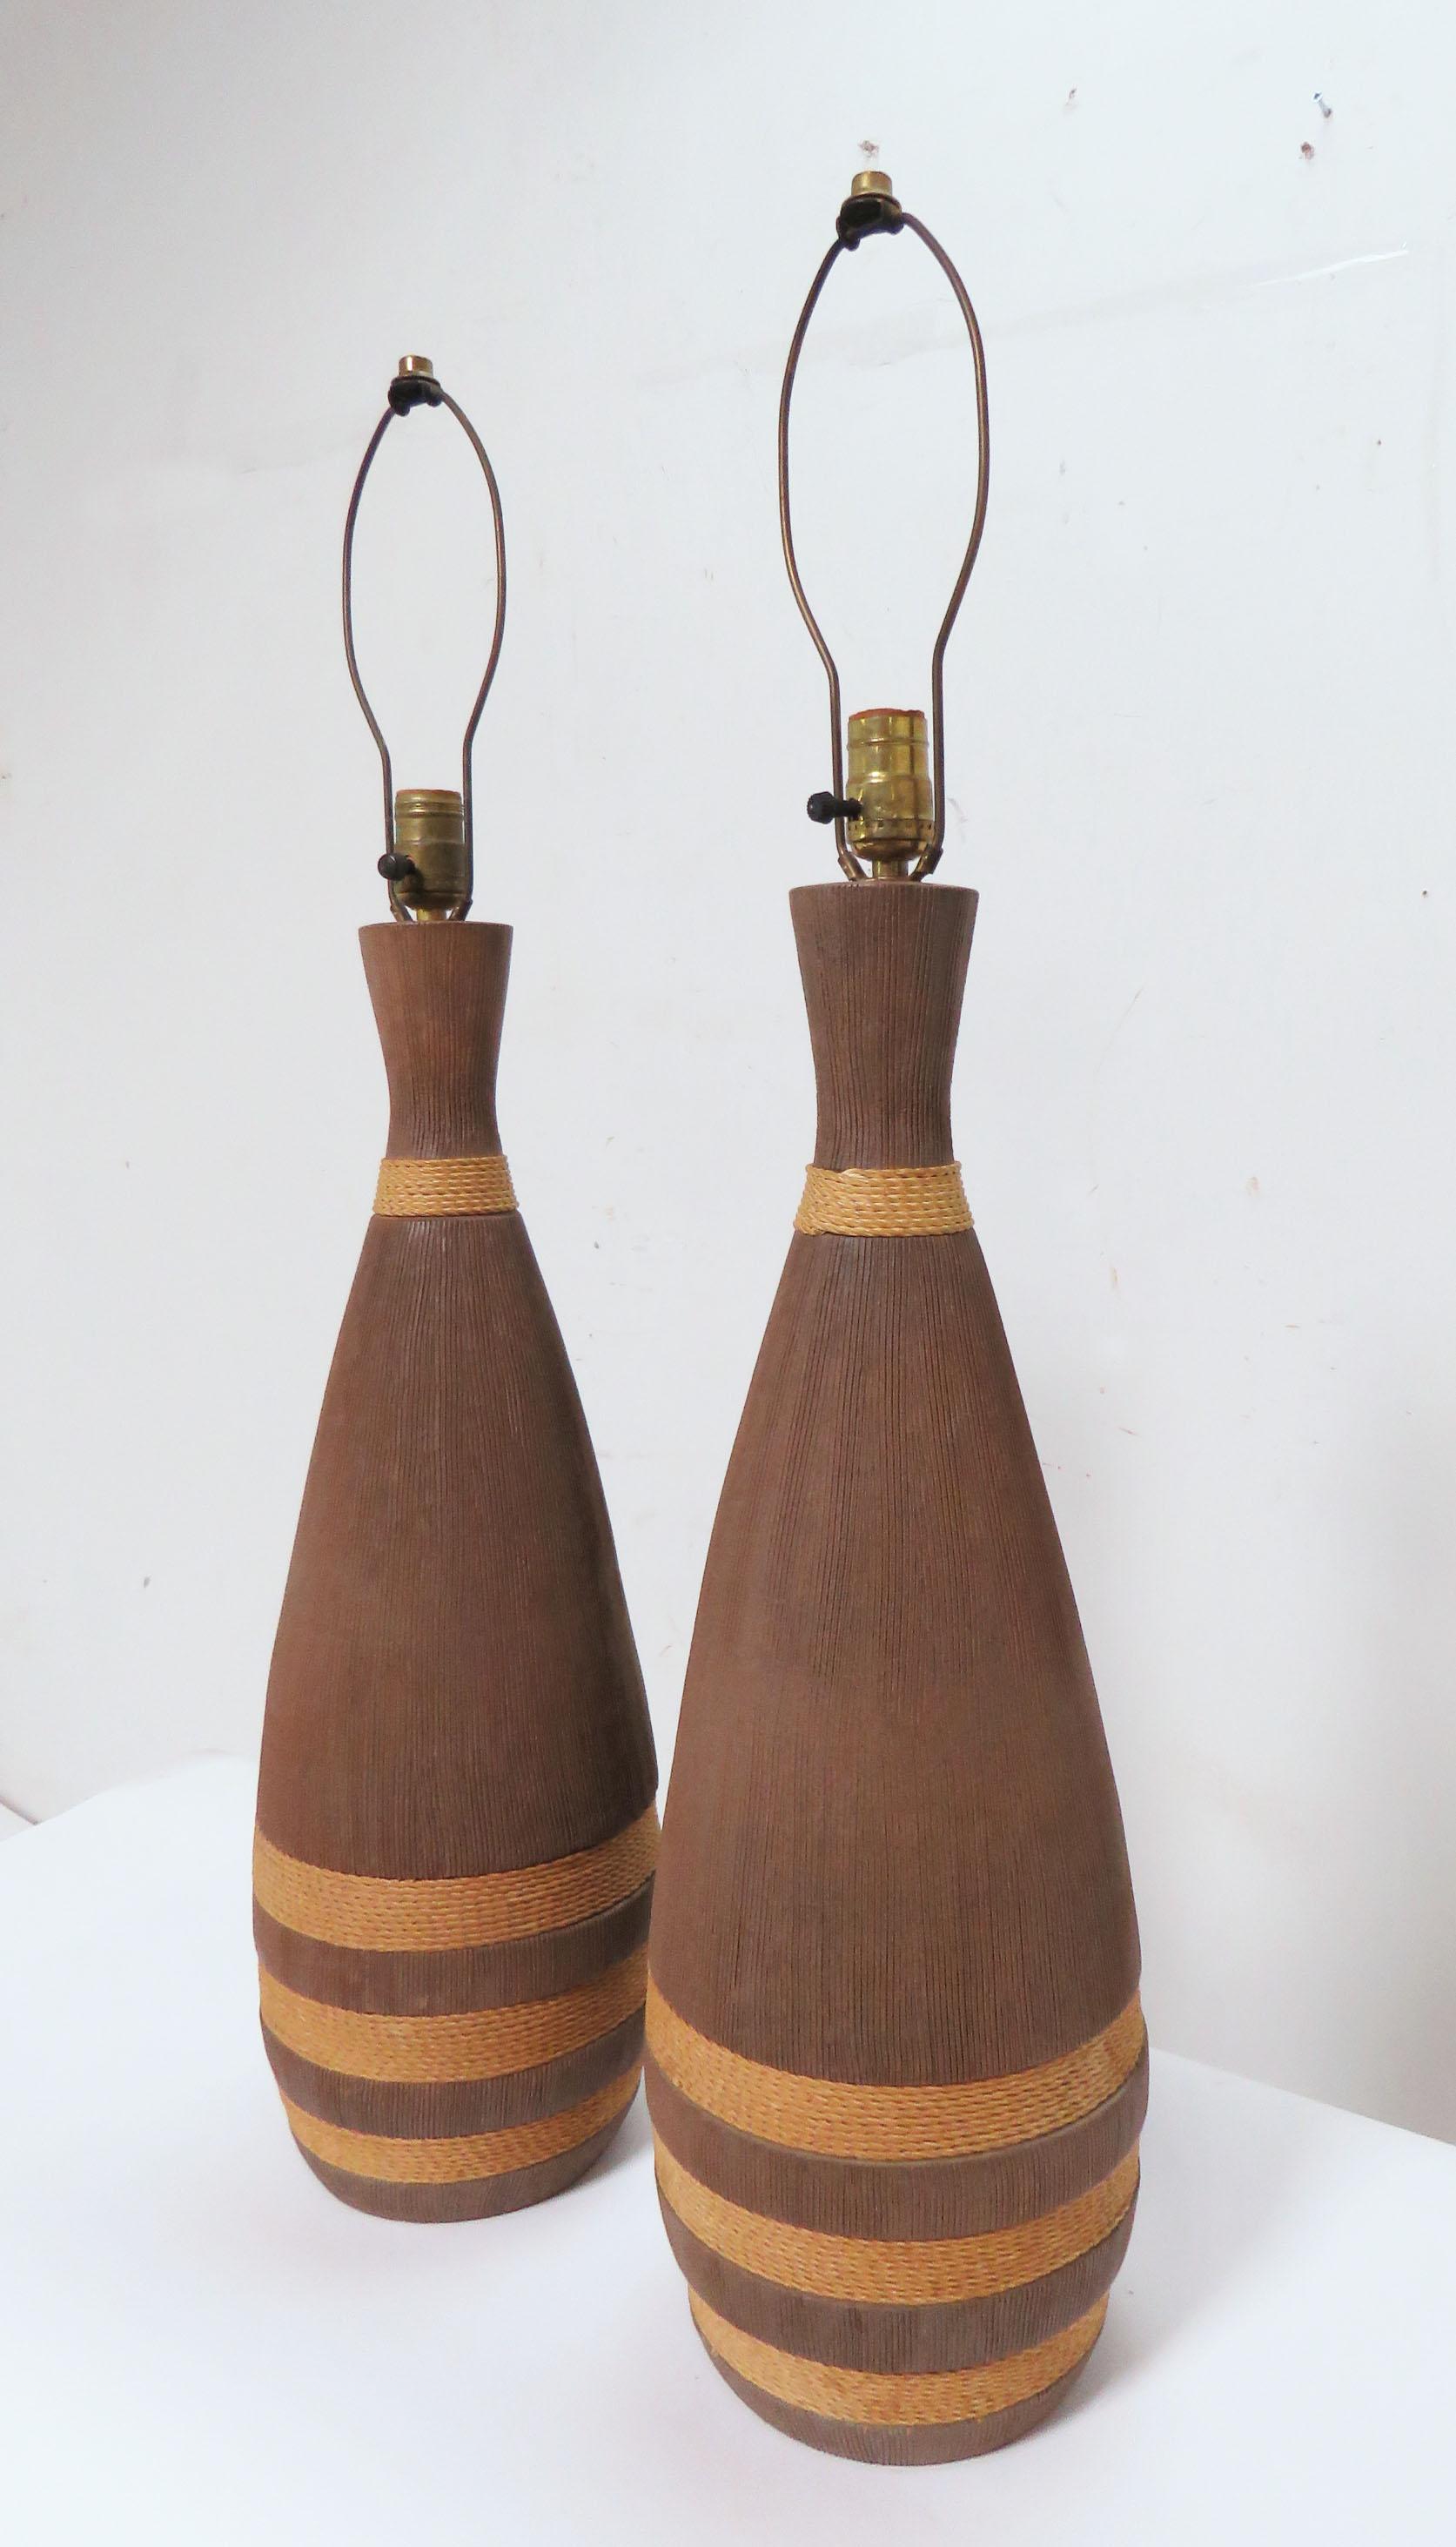 Pair of table lamps in unglazed terracotta with wraparound corded details by Aldo Londi for Bitossi, made in Italy circa 1960s. Measure 26